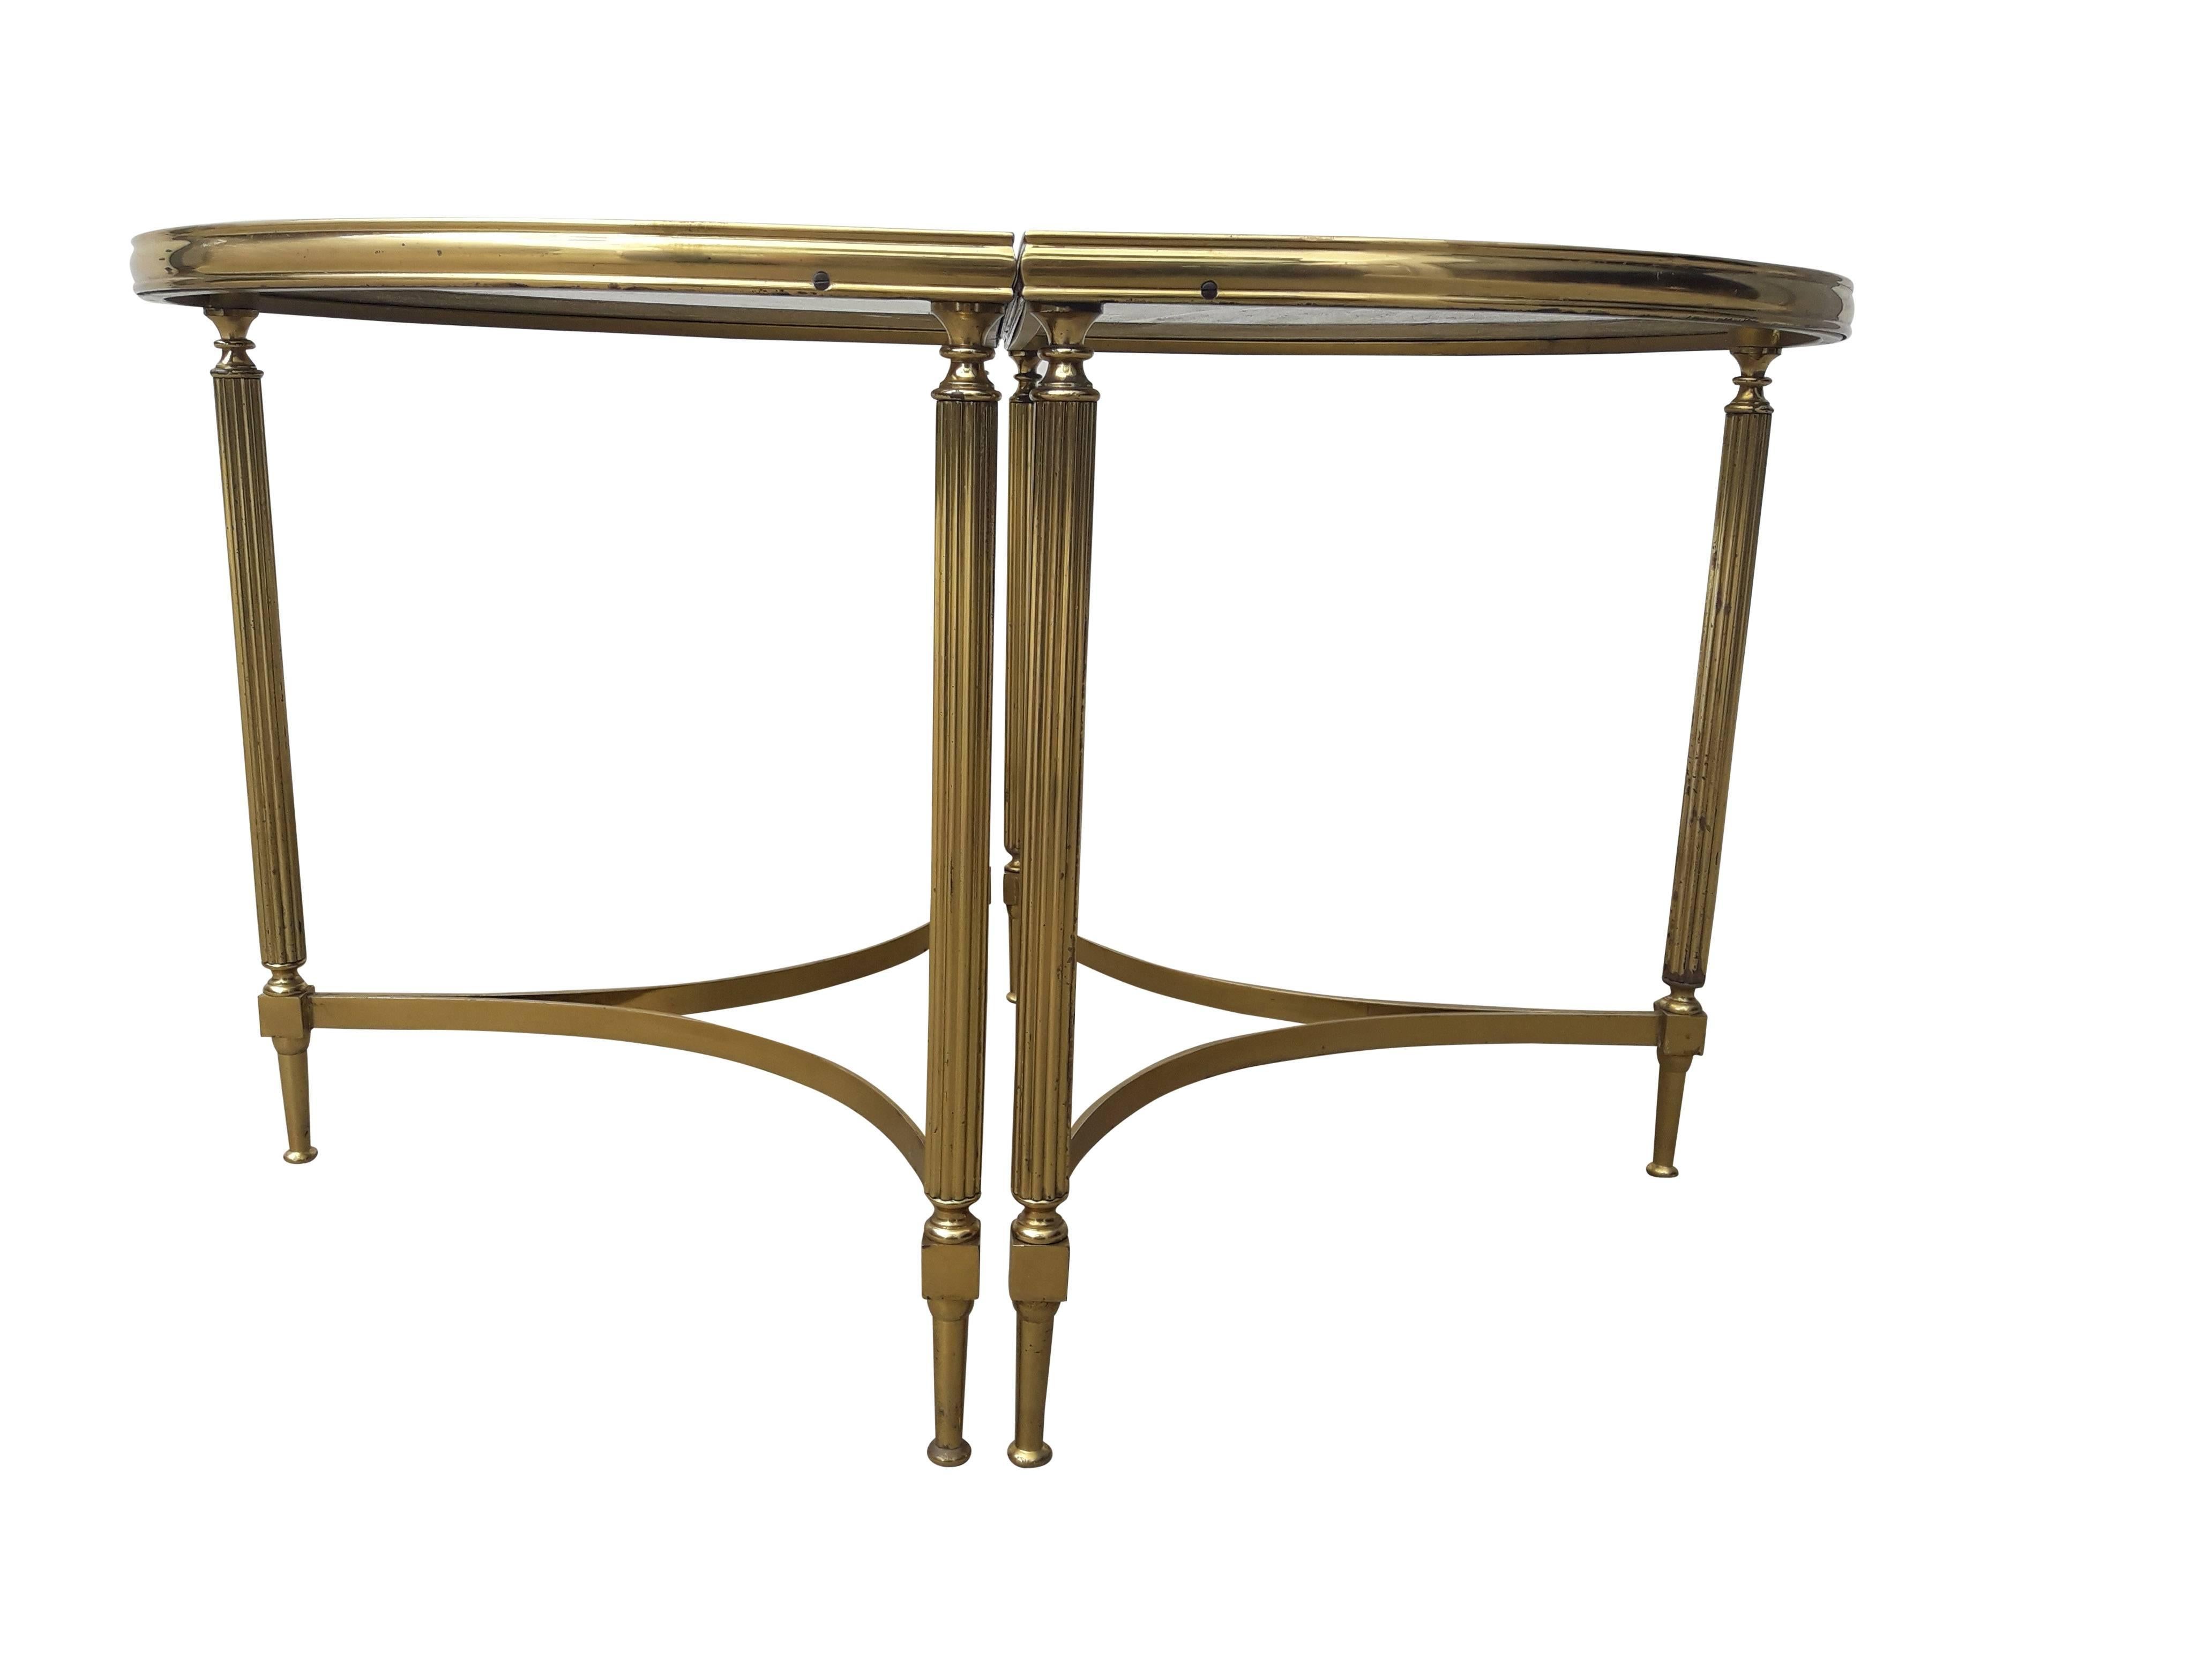 Pair of vintage brass side tables in the style of Maison Jansen.
Made in France in the 1970s.